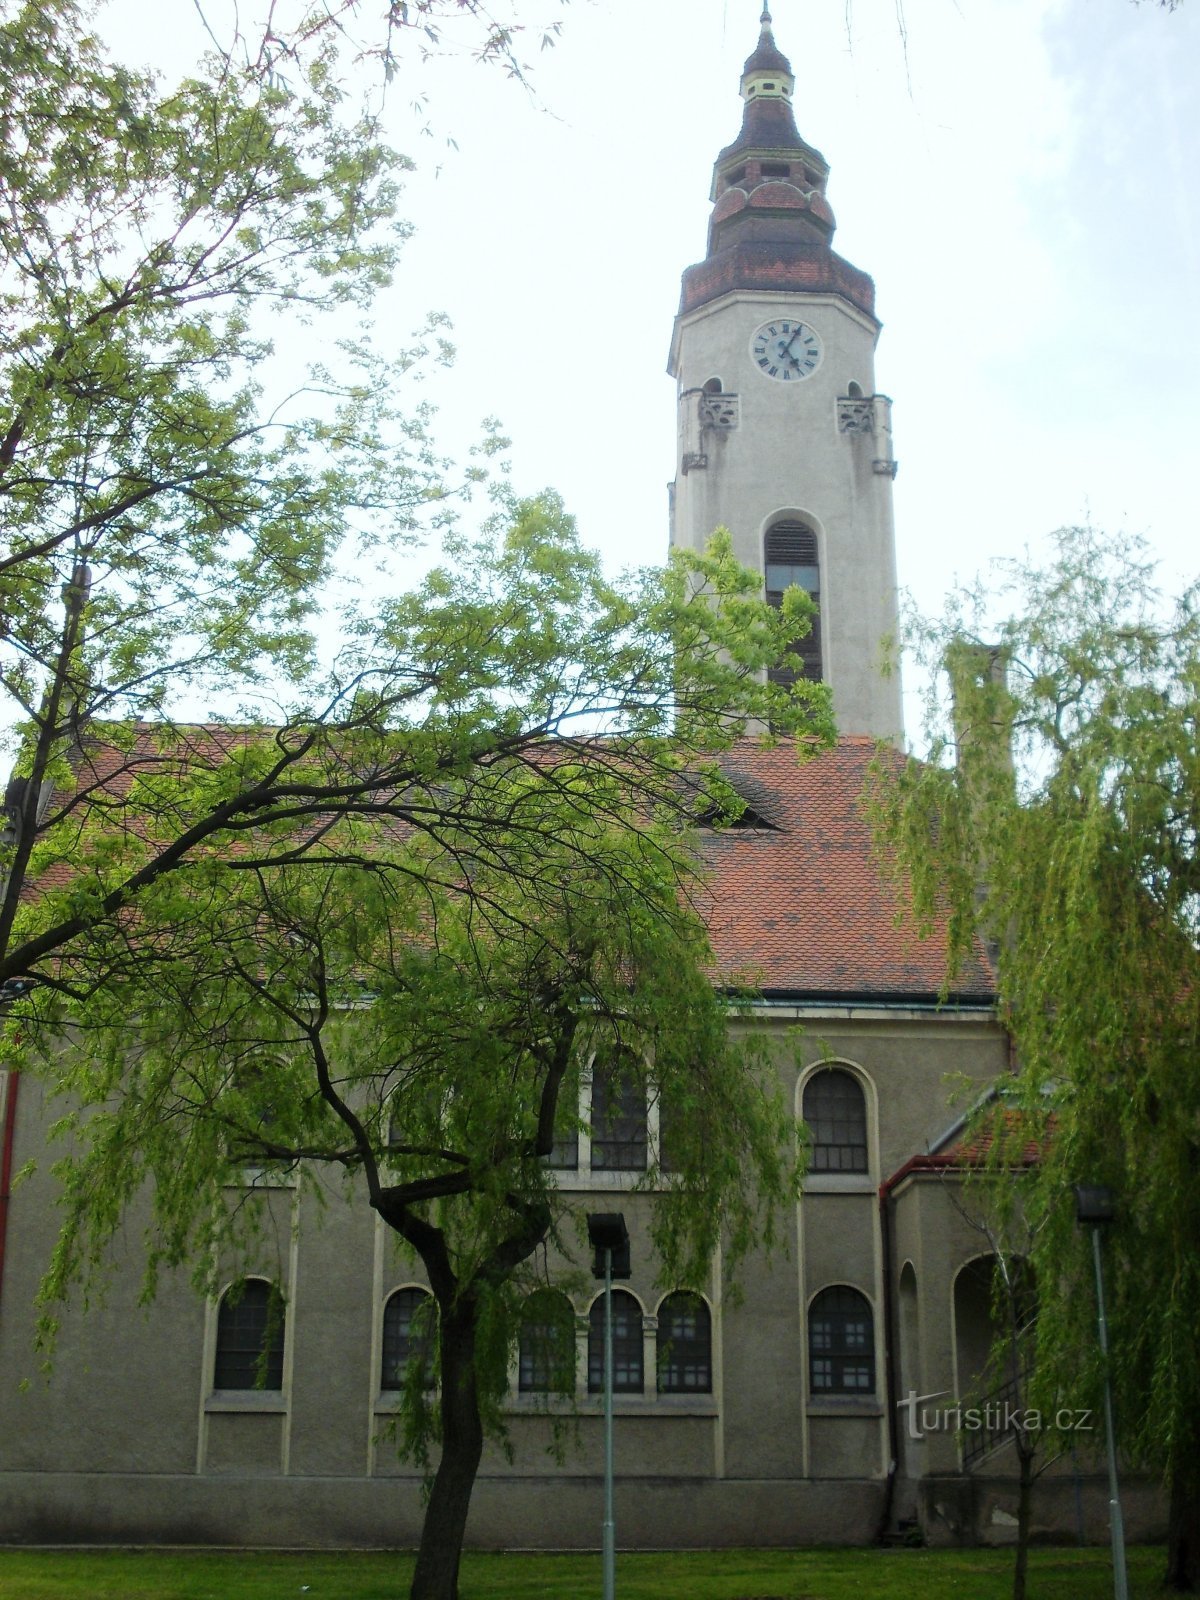 a church with an almost 42 meter high tower